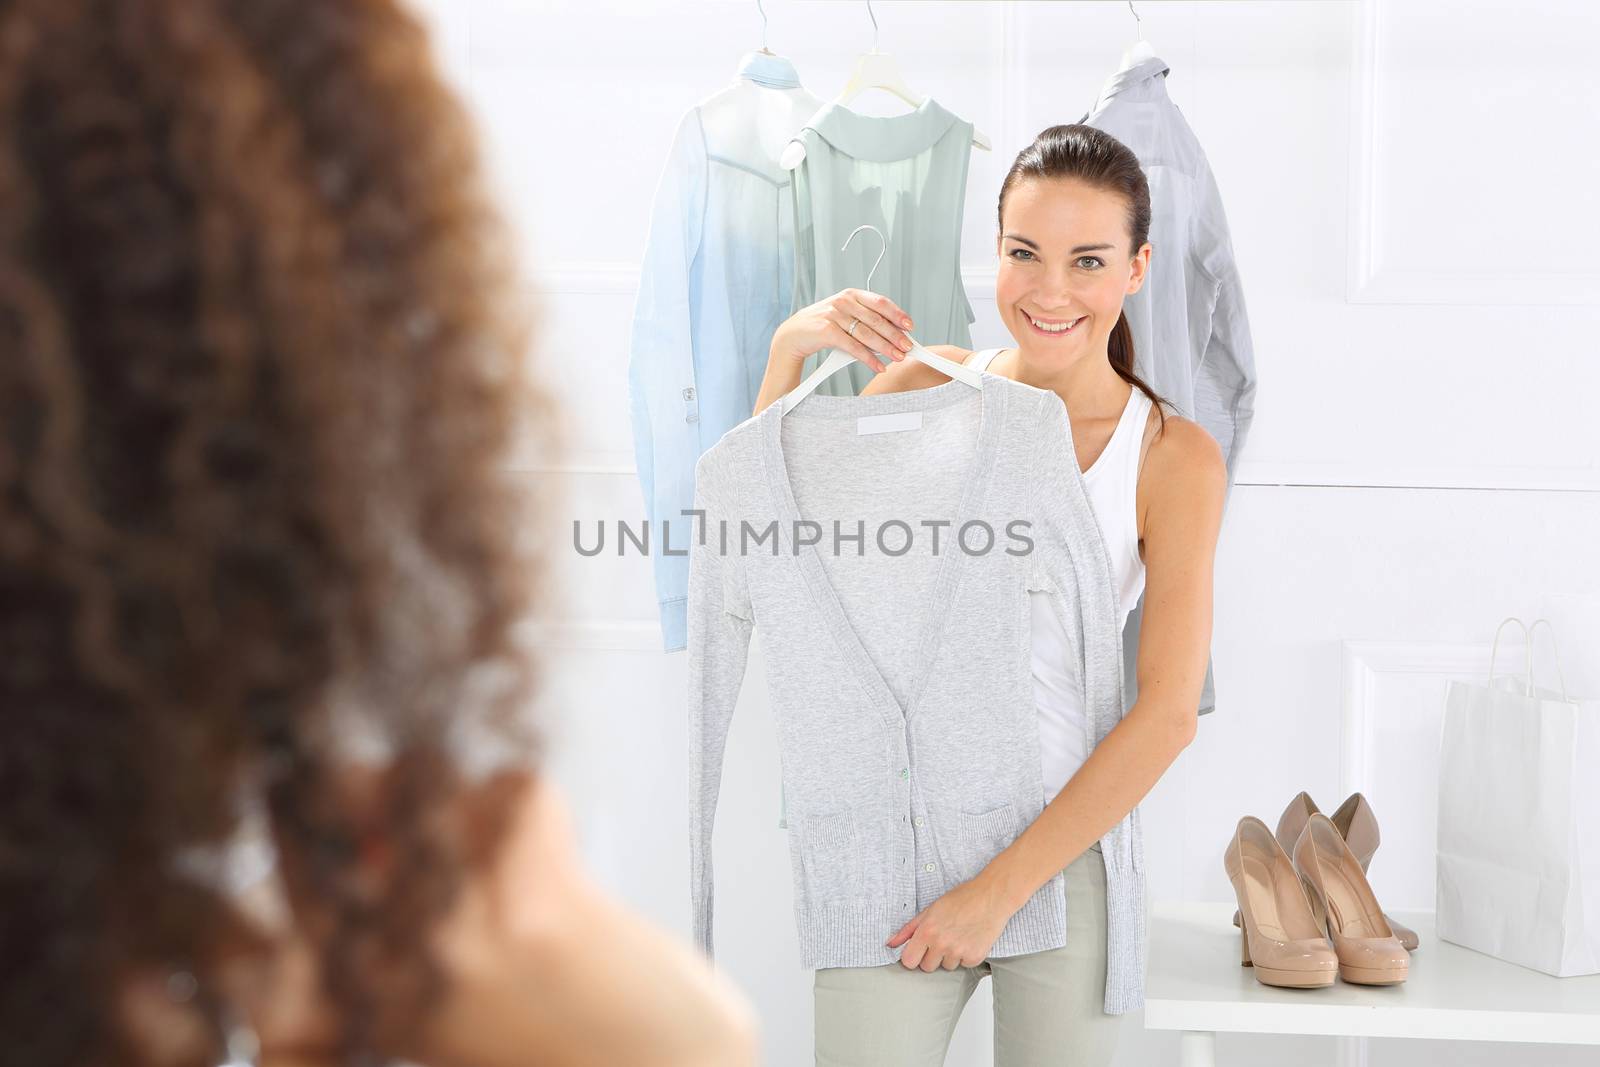 Two women shopping in boutique clothing, mulatto and Caucasian